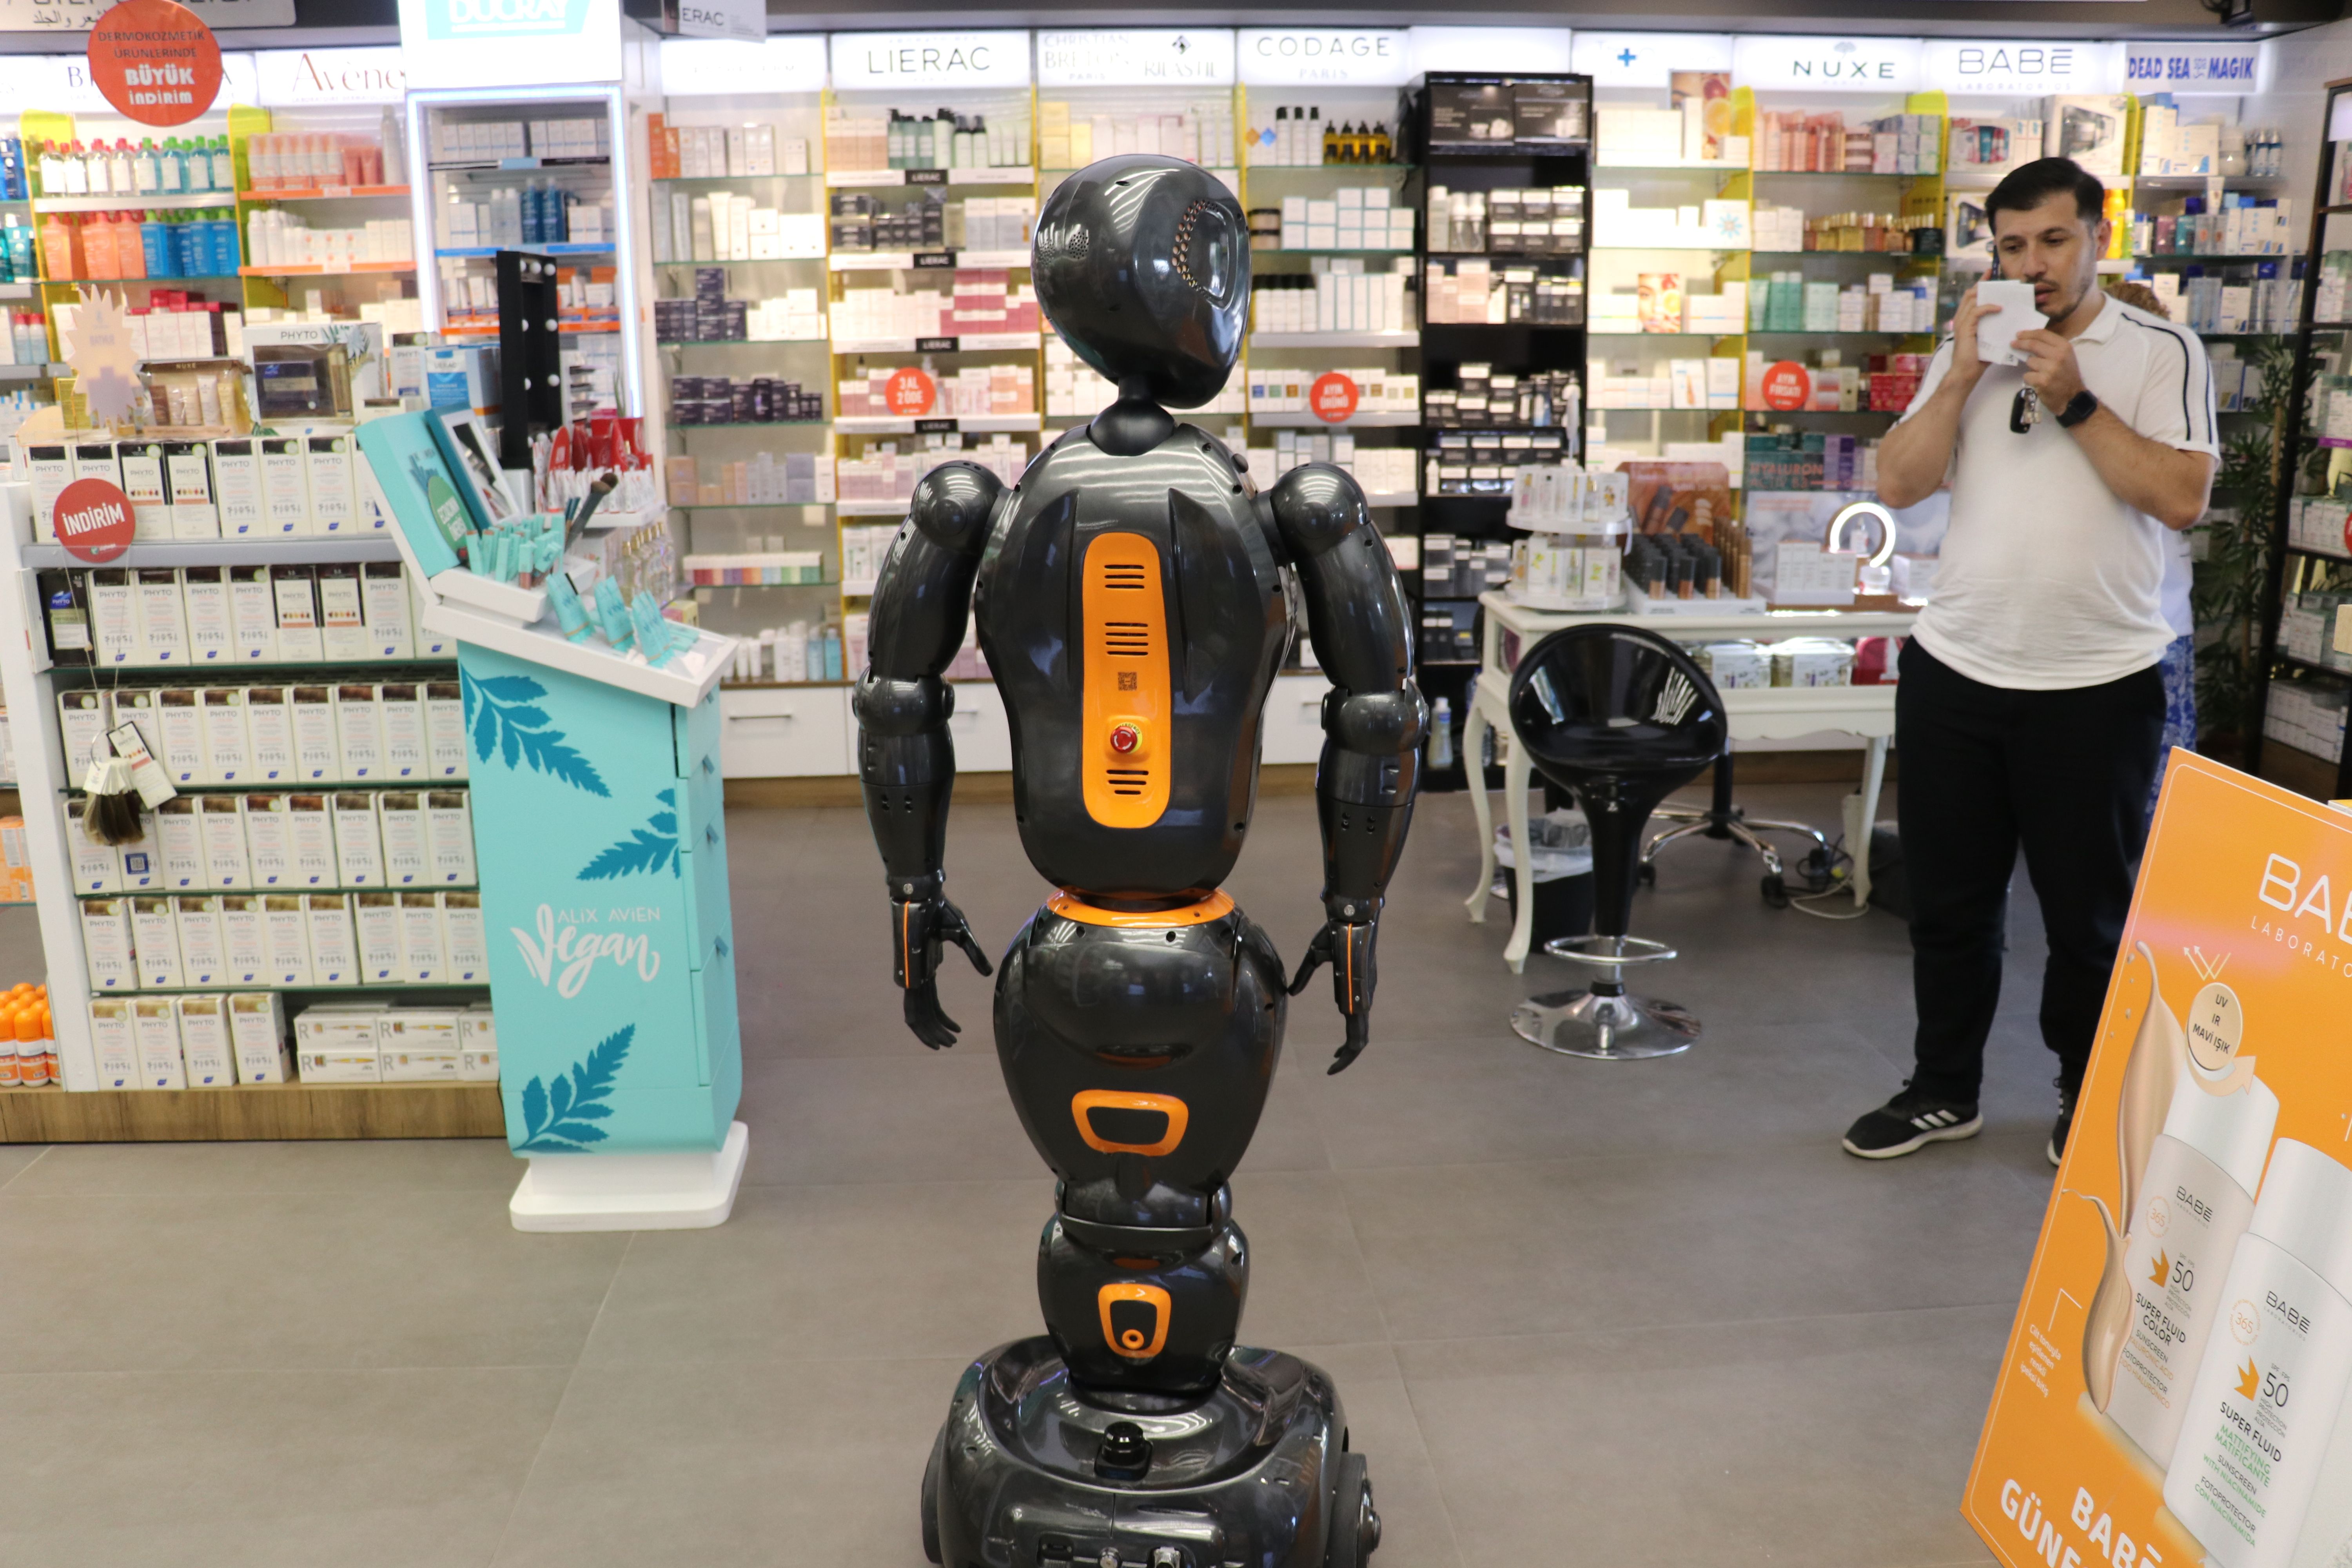 A humanoid robot stands in a pharmacy, surrounded by shelves of pill bottles.